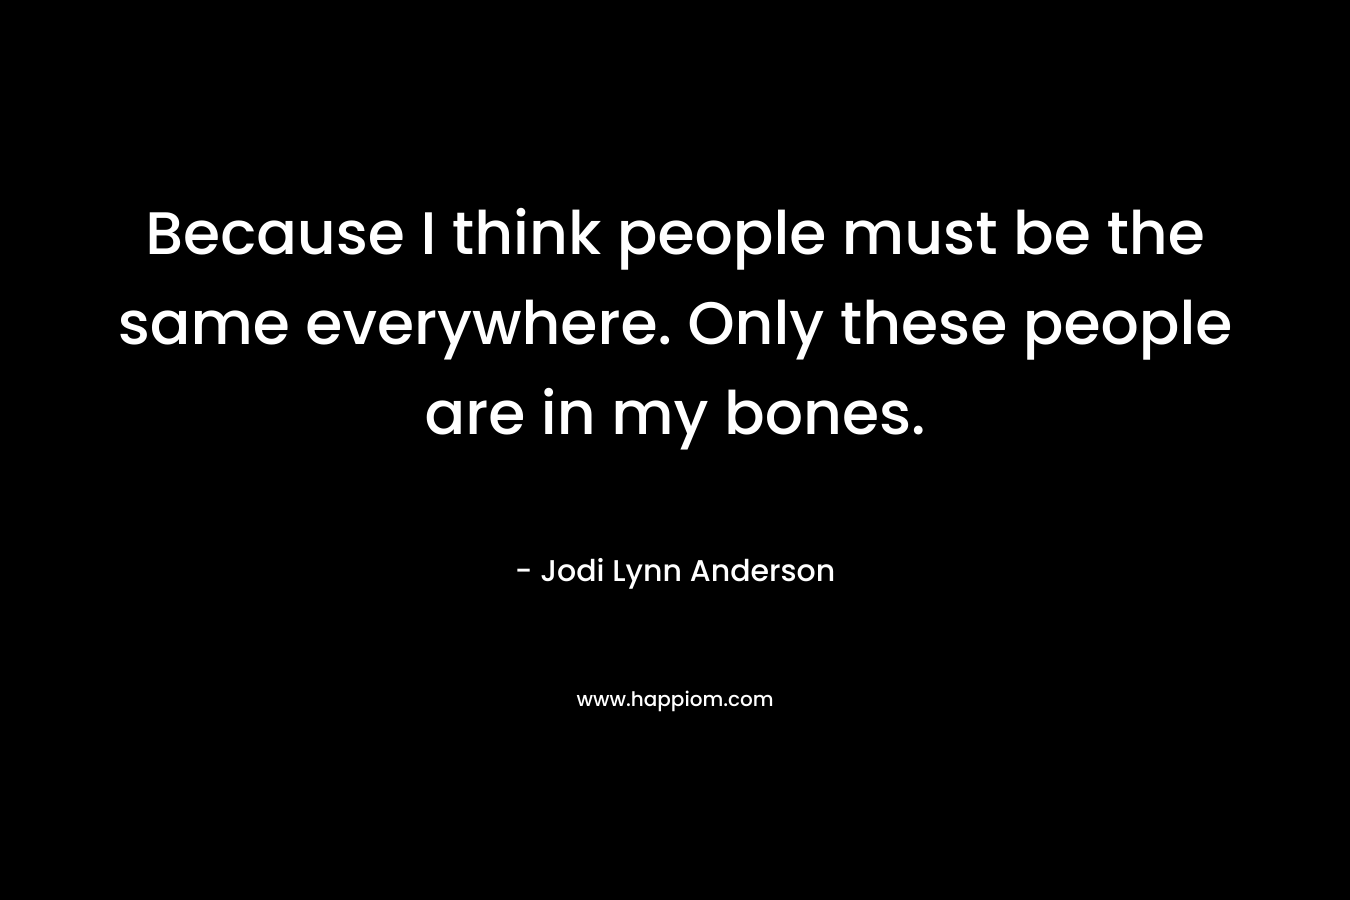 Because I think people must be the same everywhere. Only these people are in my bones.